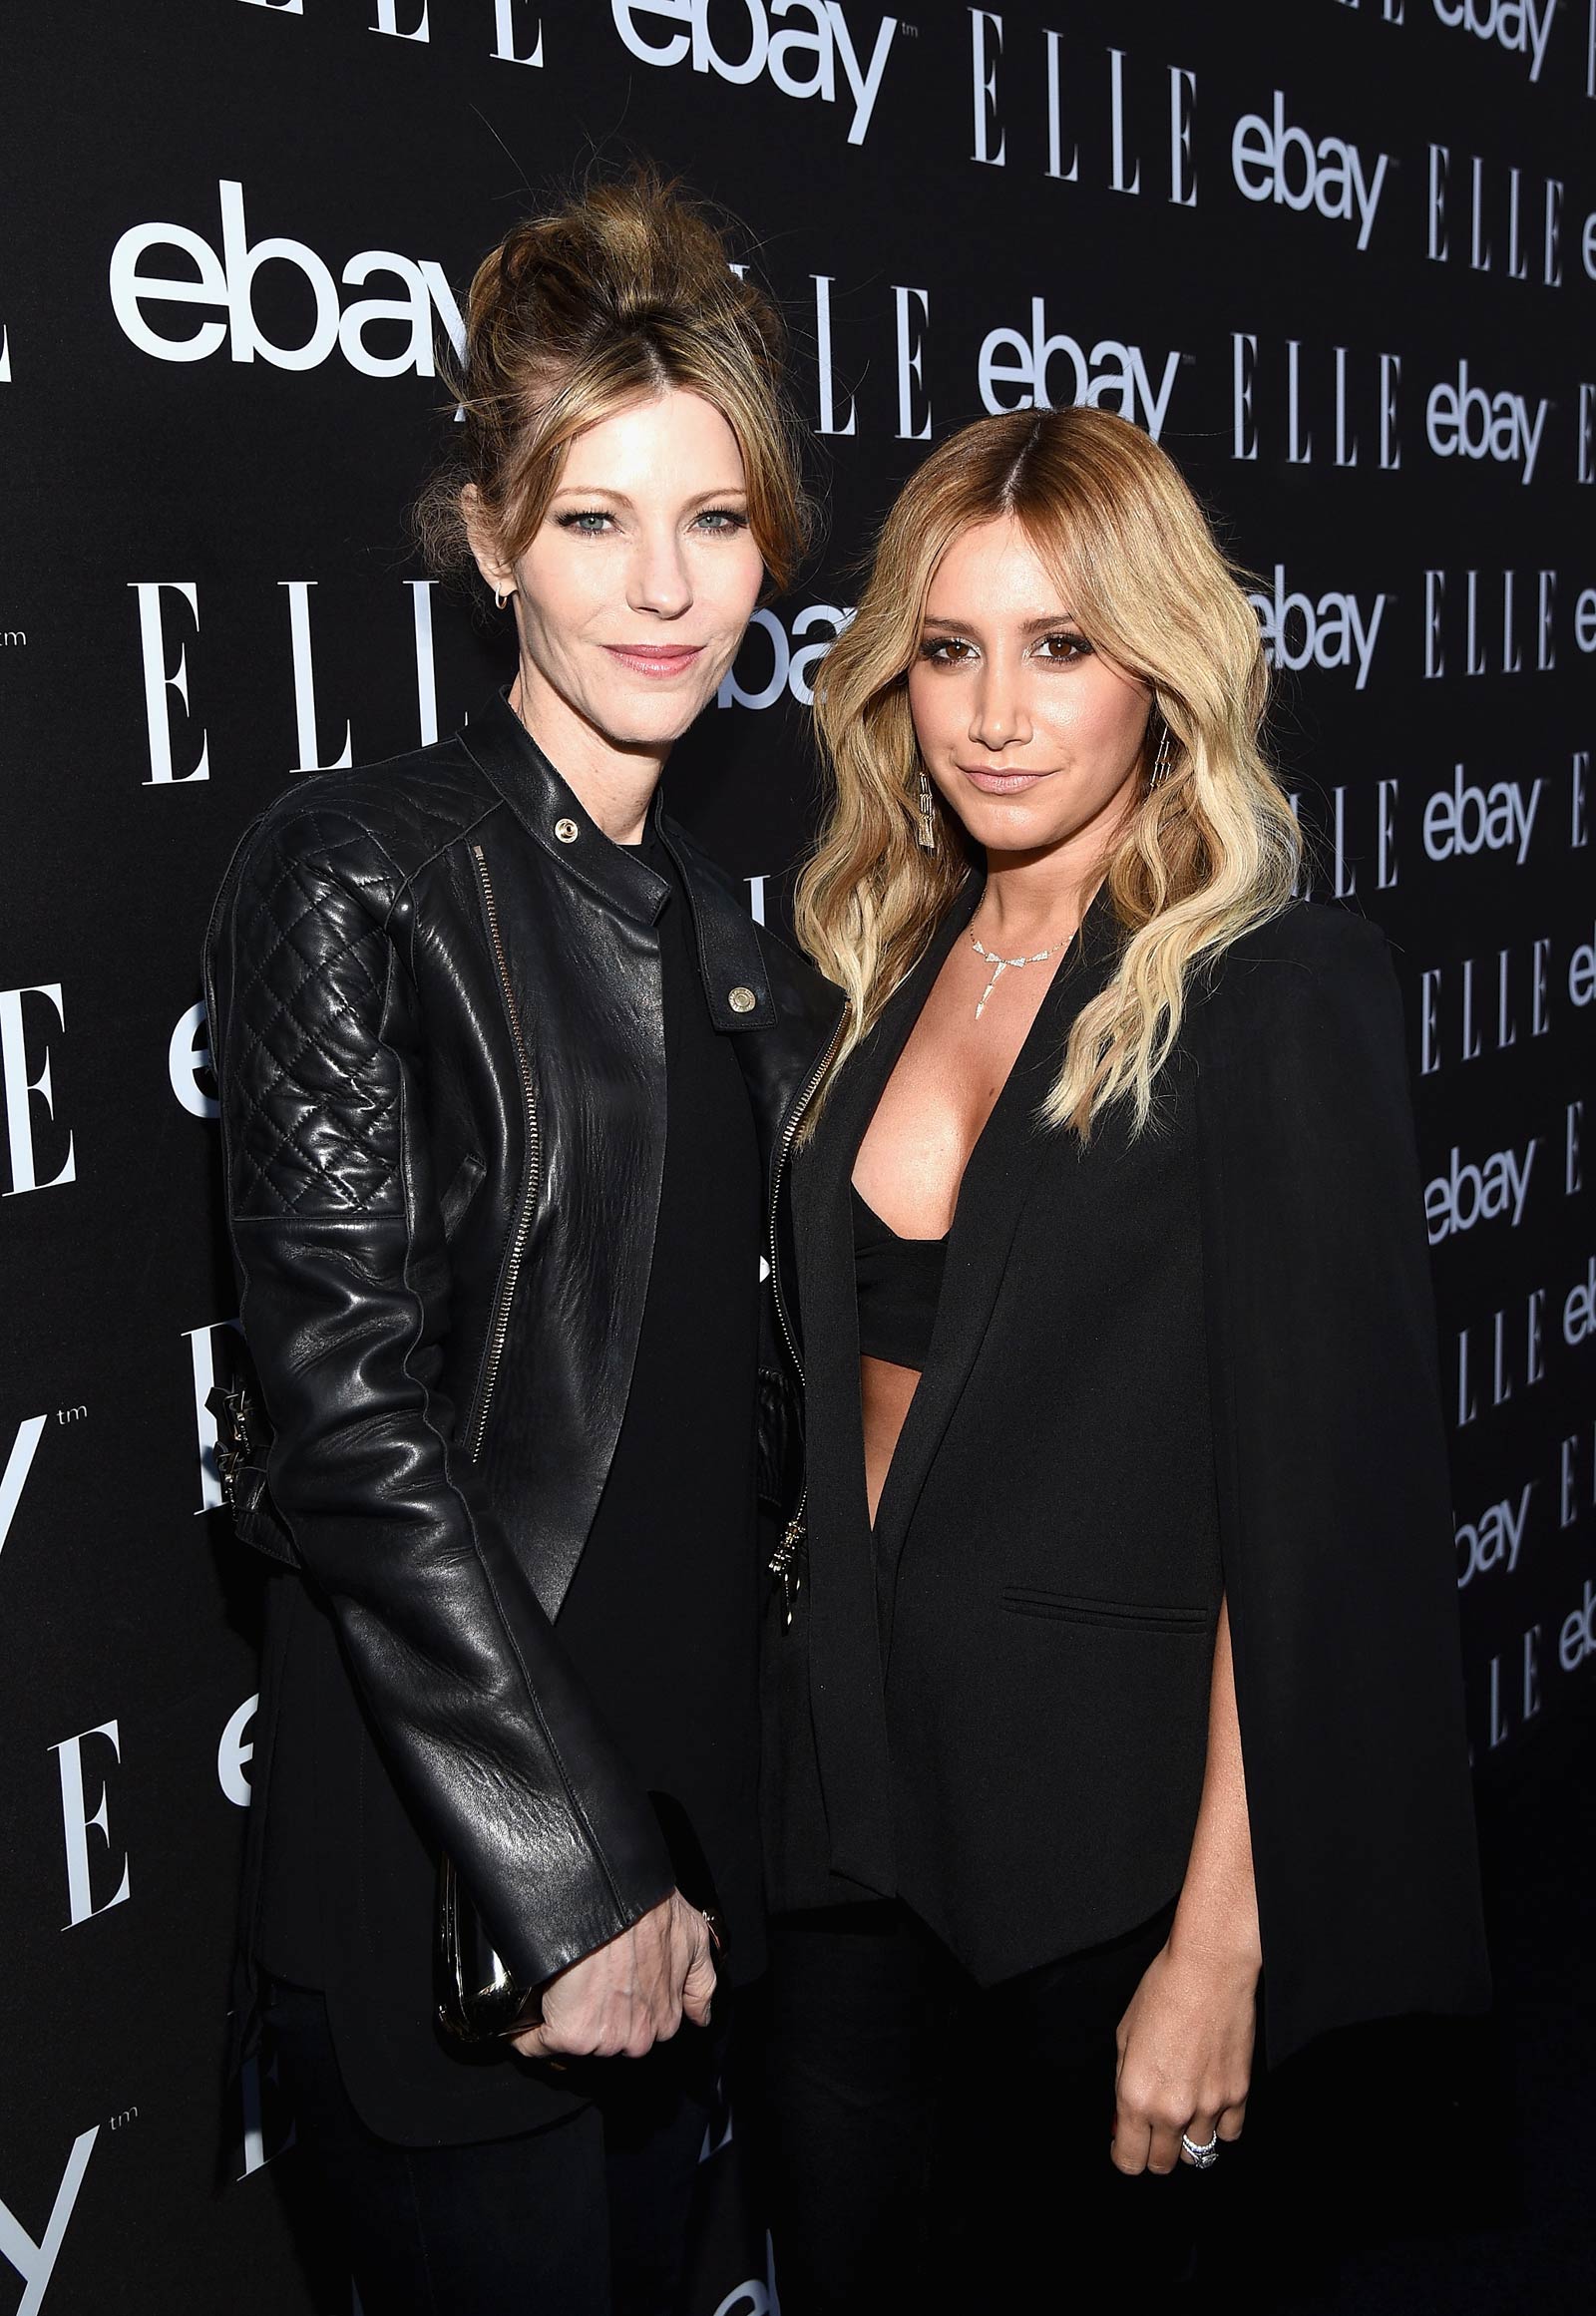 Ashley Tisdale attends 6th Annual ELLE Women In Music Celebration